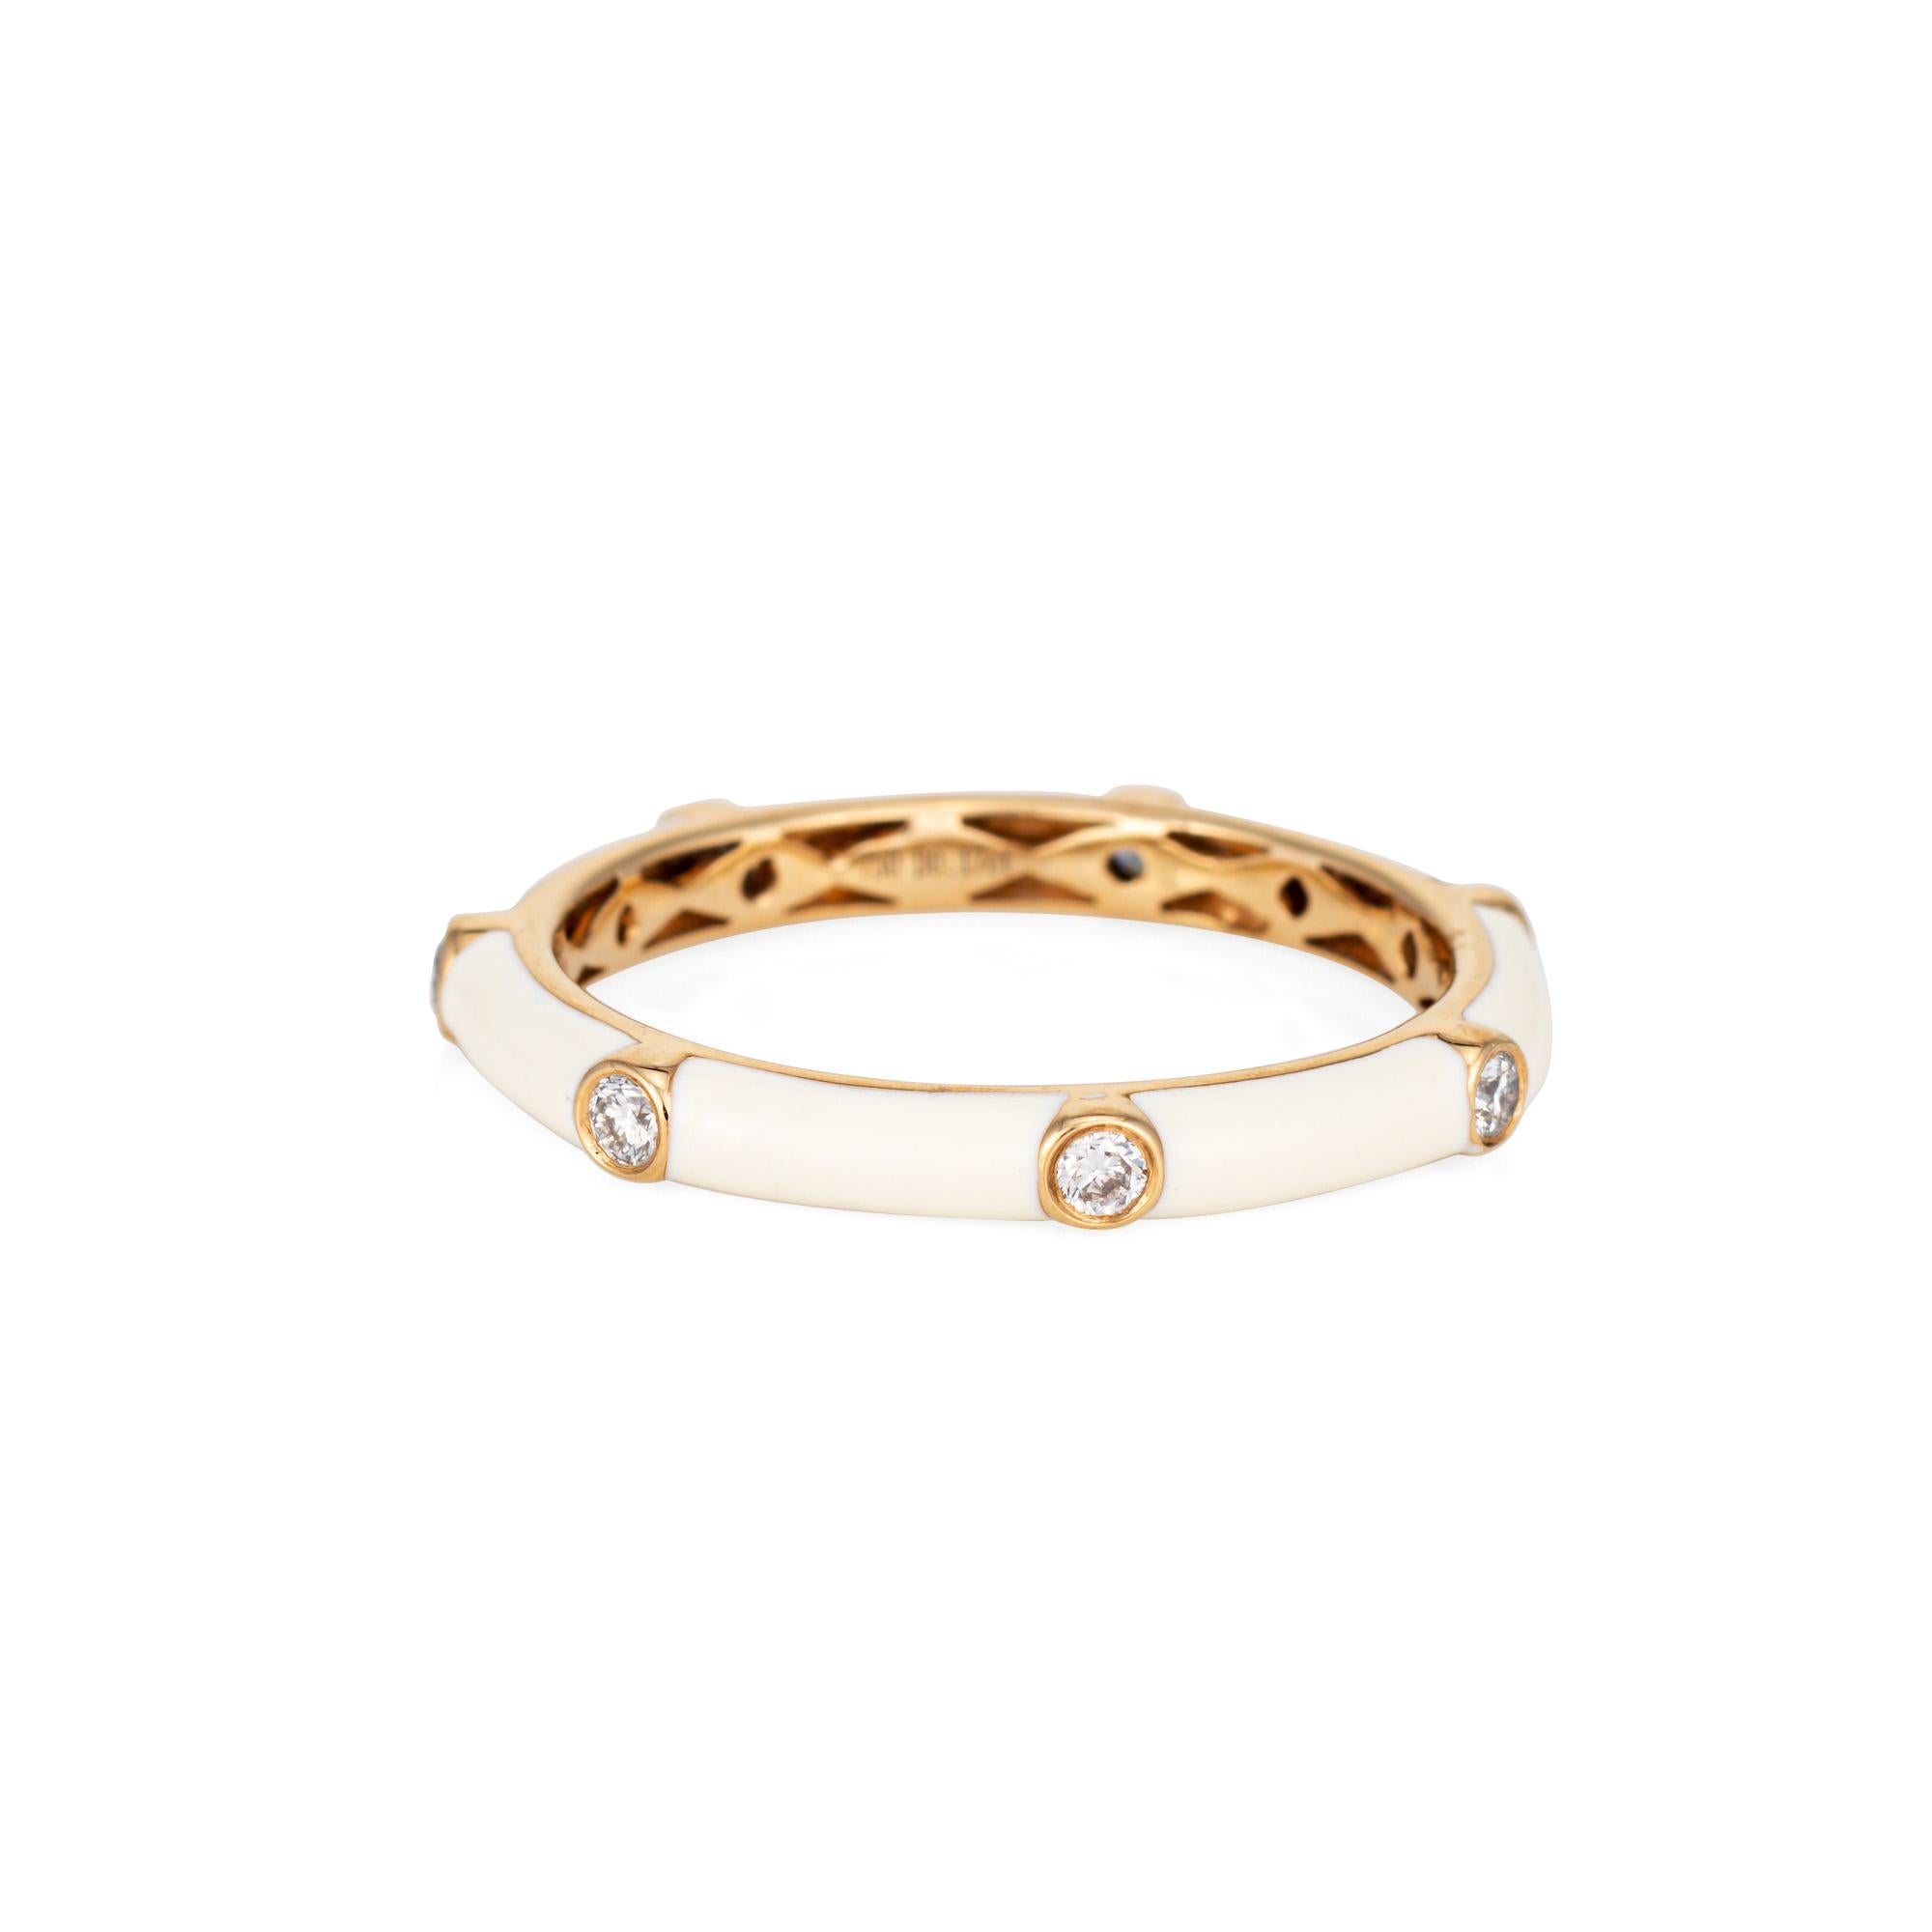 Stylish white enamel & diamond stacking band crafted in 18 karat yellow gold. 

7 round brilliant cut diamond totals an estimated 0.17 carats (estimated at H-I color and SI2 clarity). 

The white enameled band is set with small diamonds around the